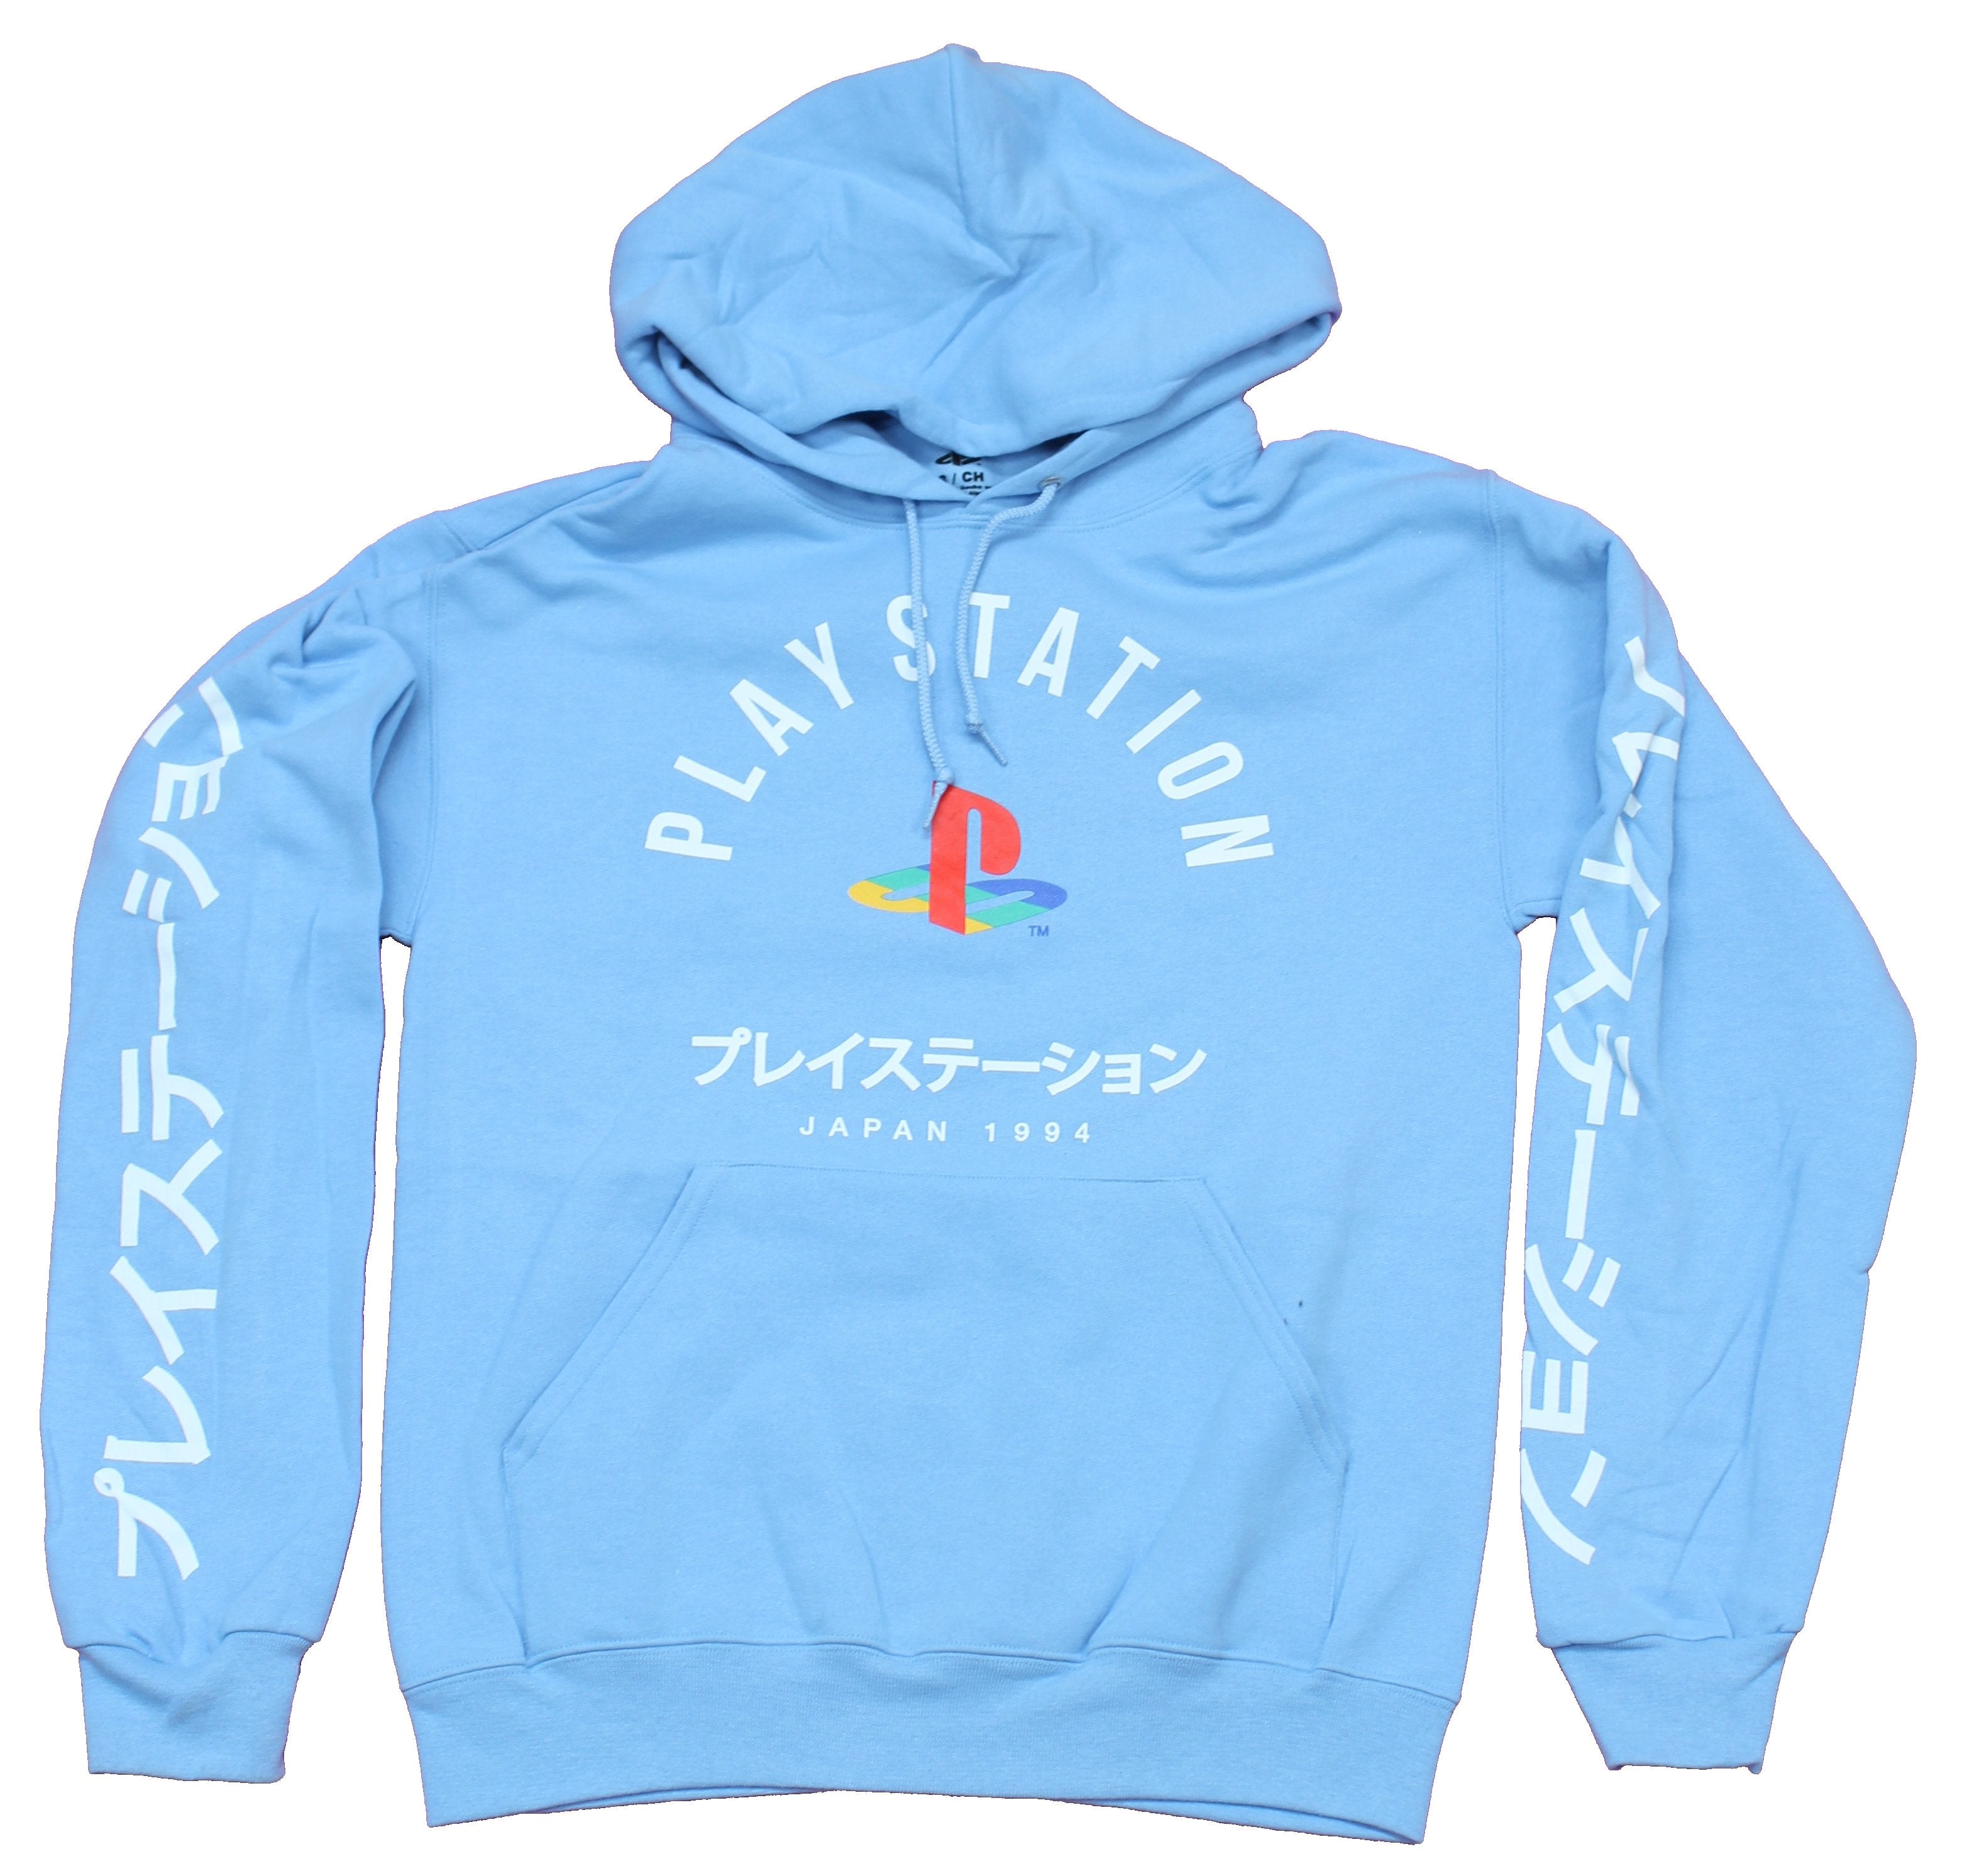 Numskull's 'Since 94' Line of Classic PlayStation Gear is Quality Apparel